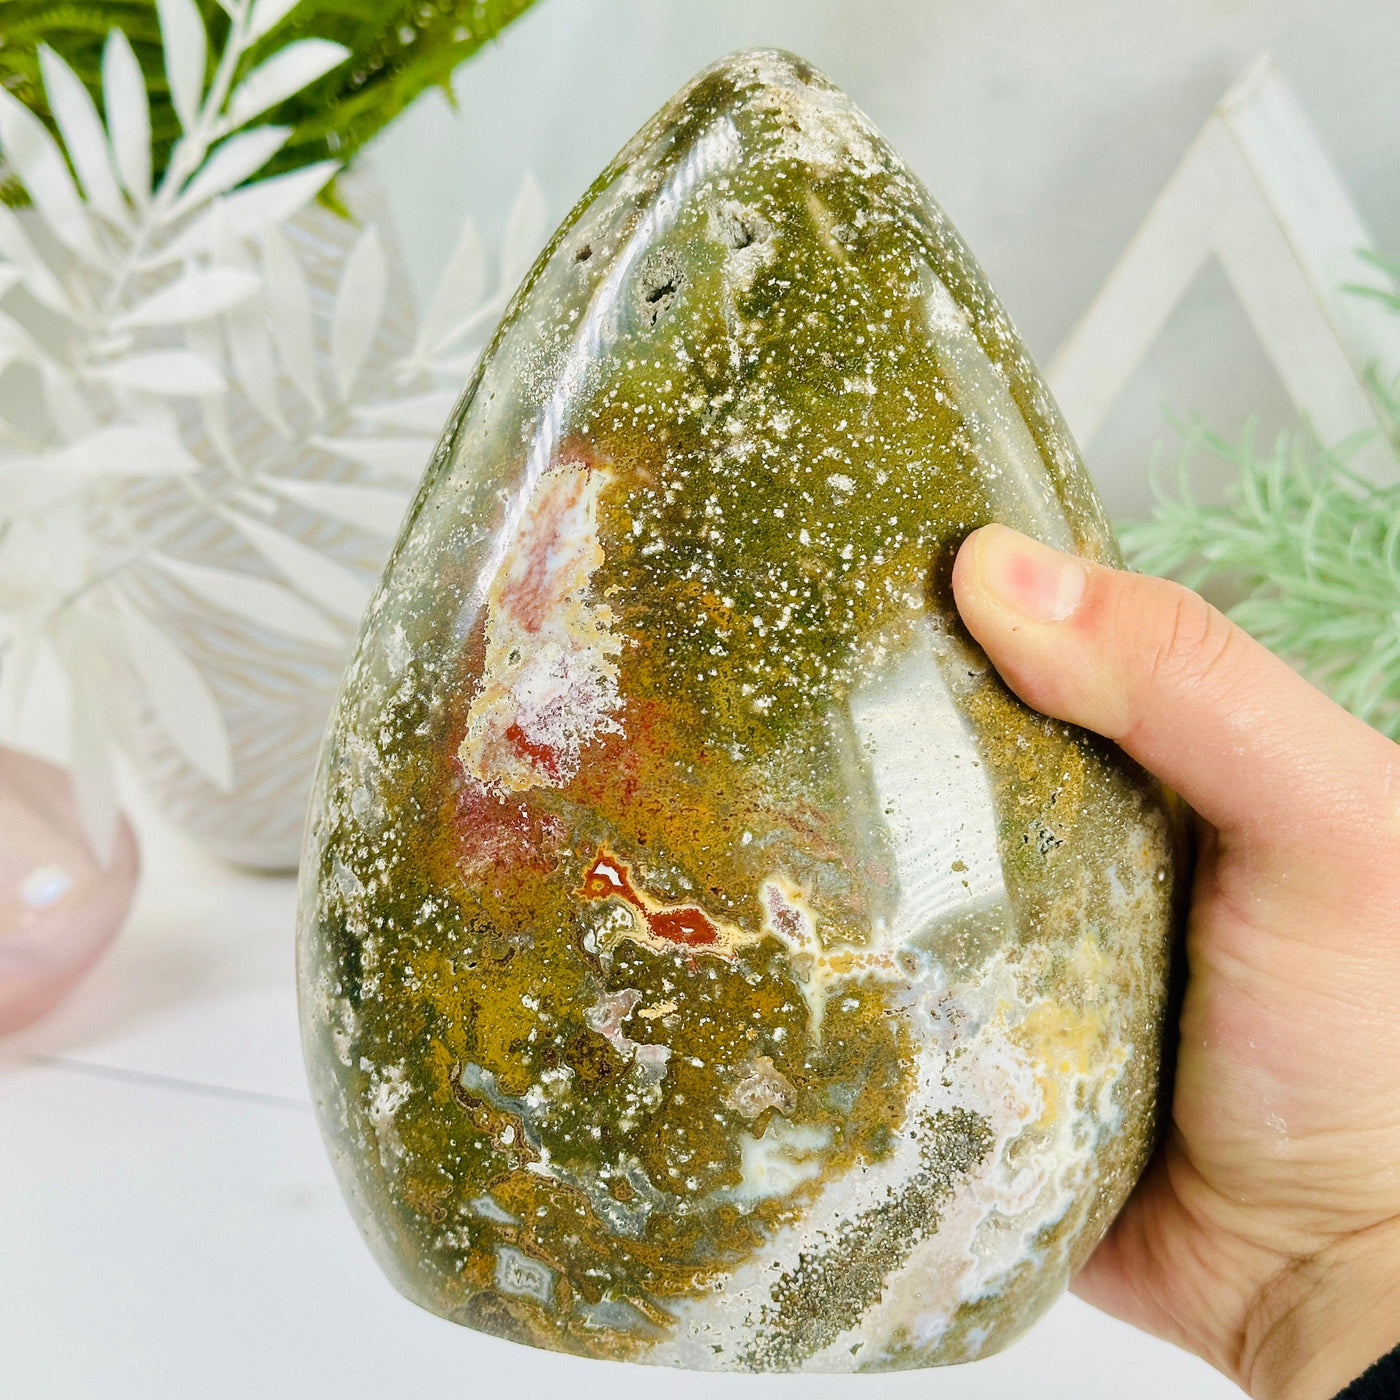 Ocean Jasper Polished Crystal Cut Base with hand for size reference